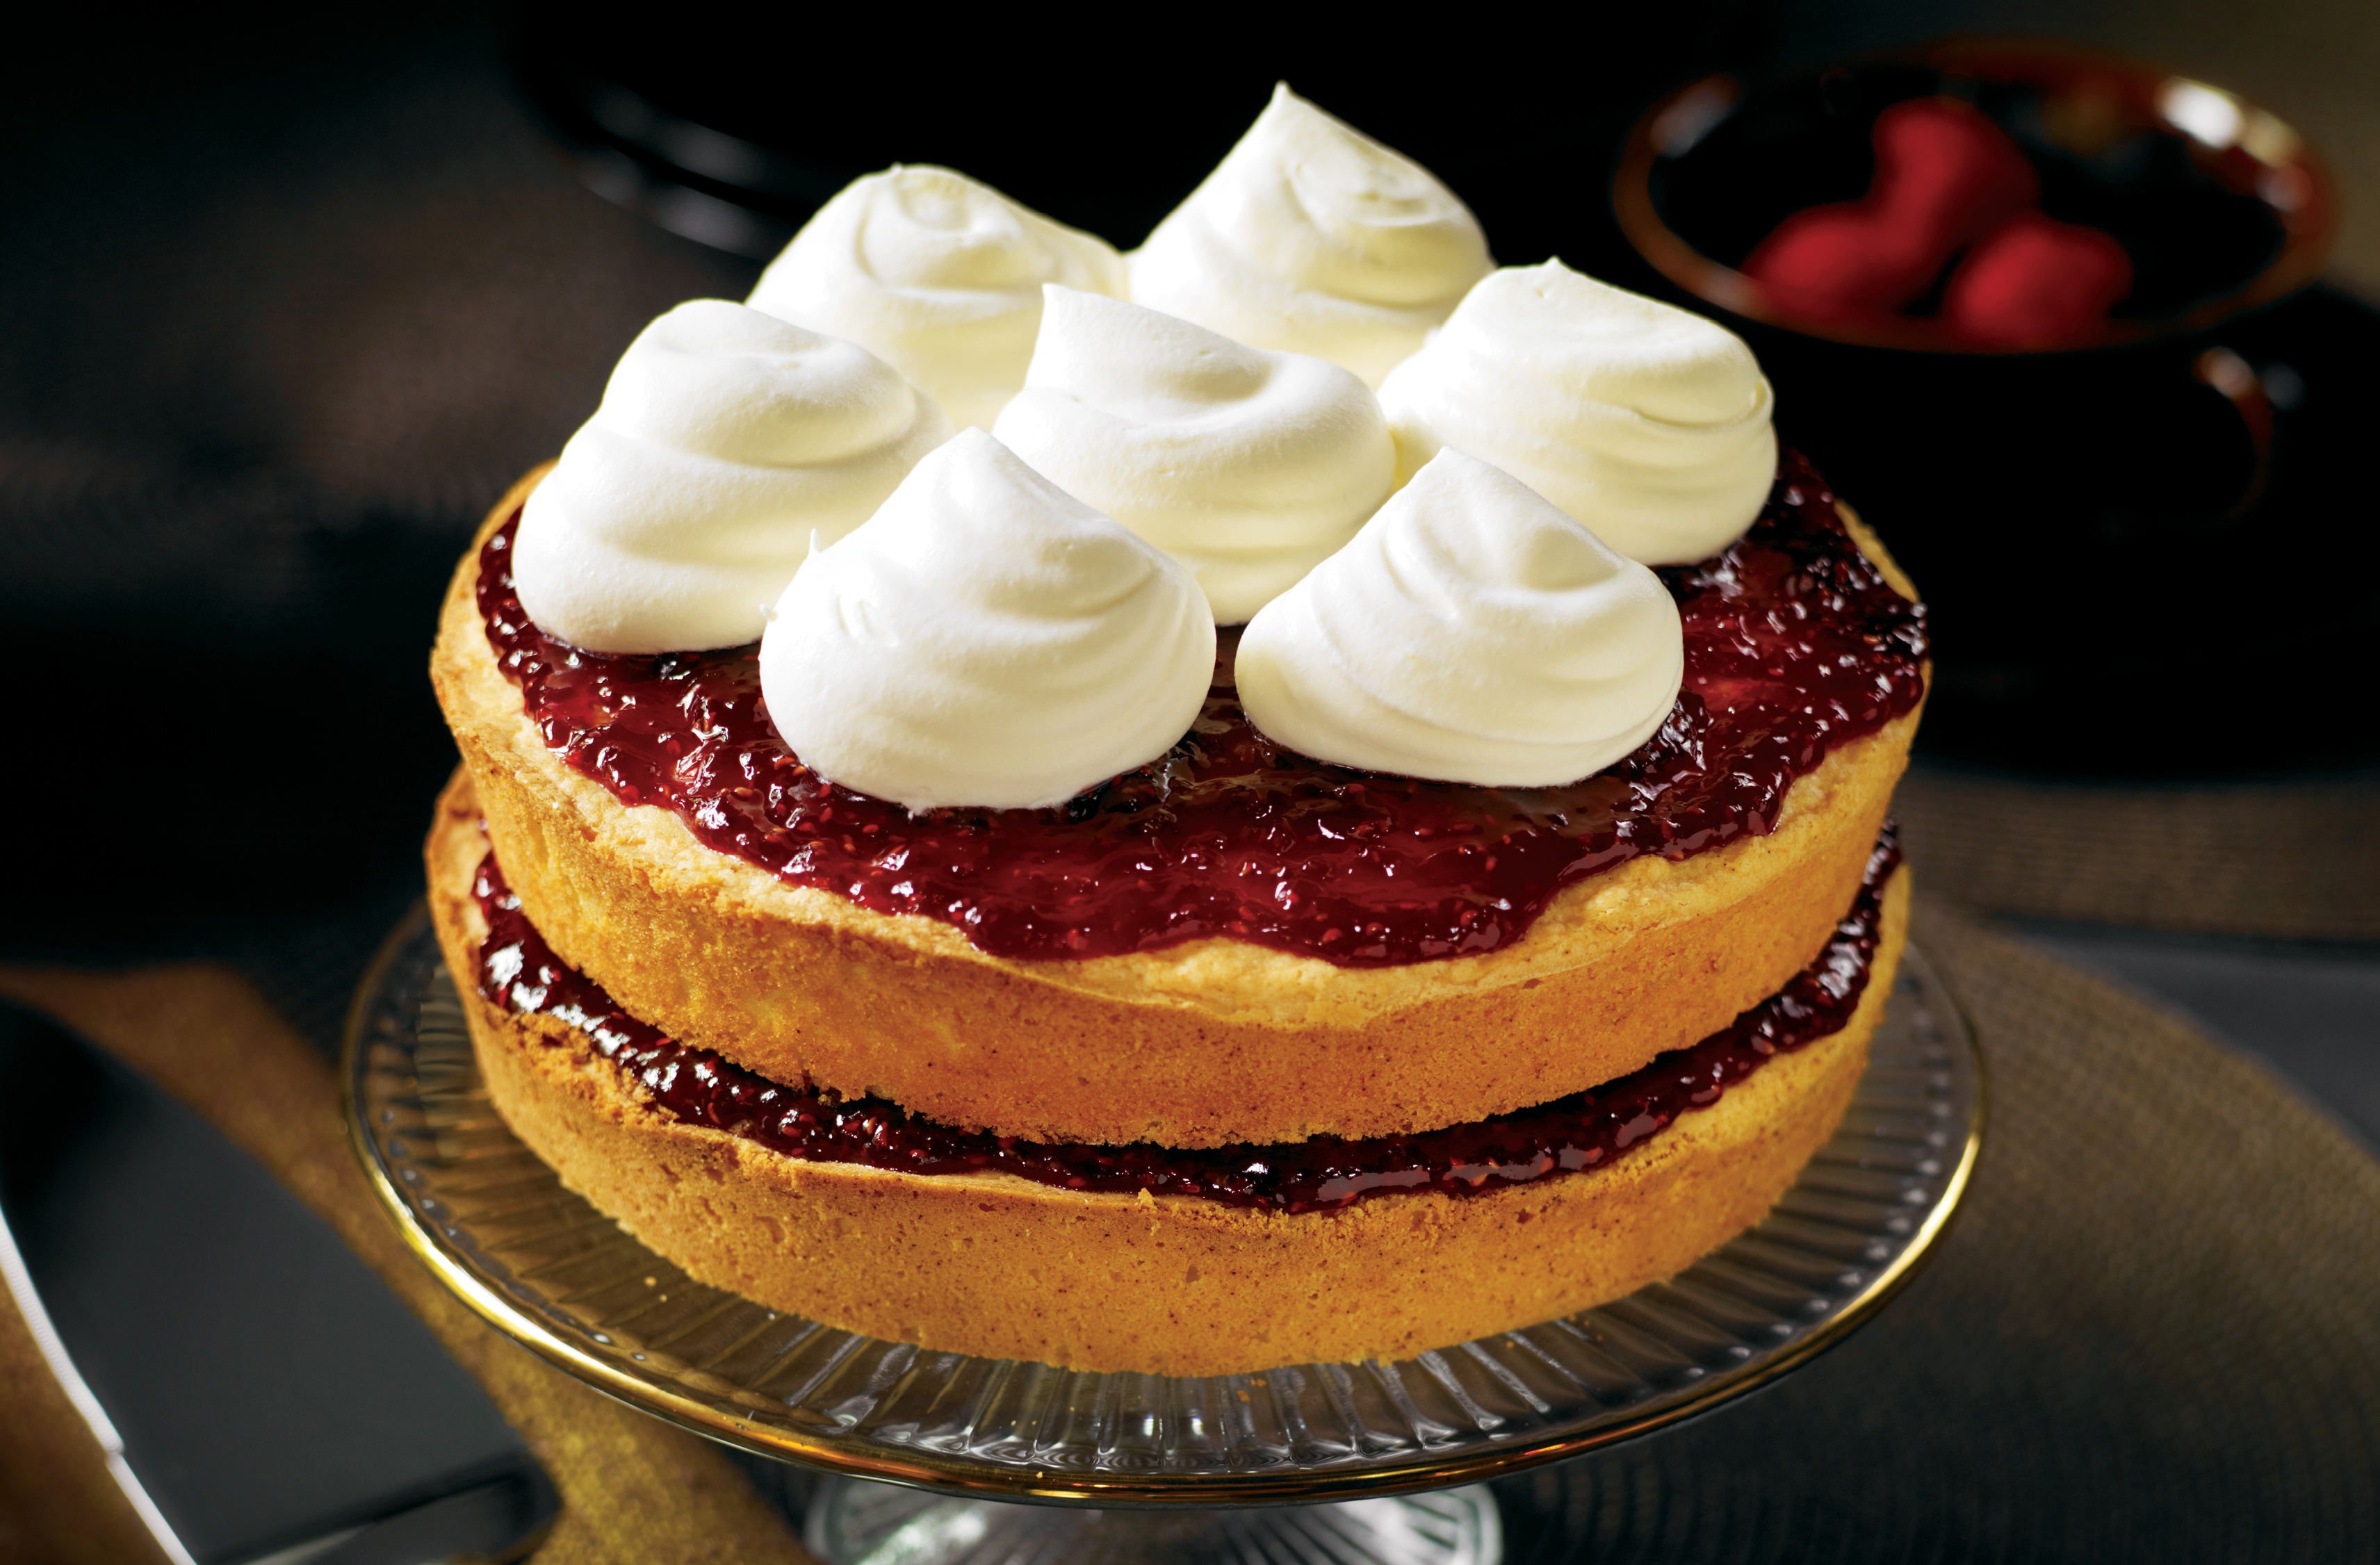 A 2 layer cake, filled & topped with raspberry fruit spread & whipped cream
